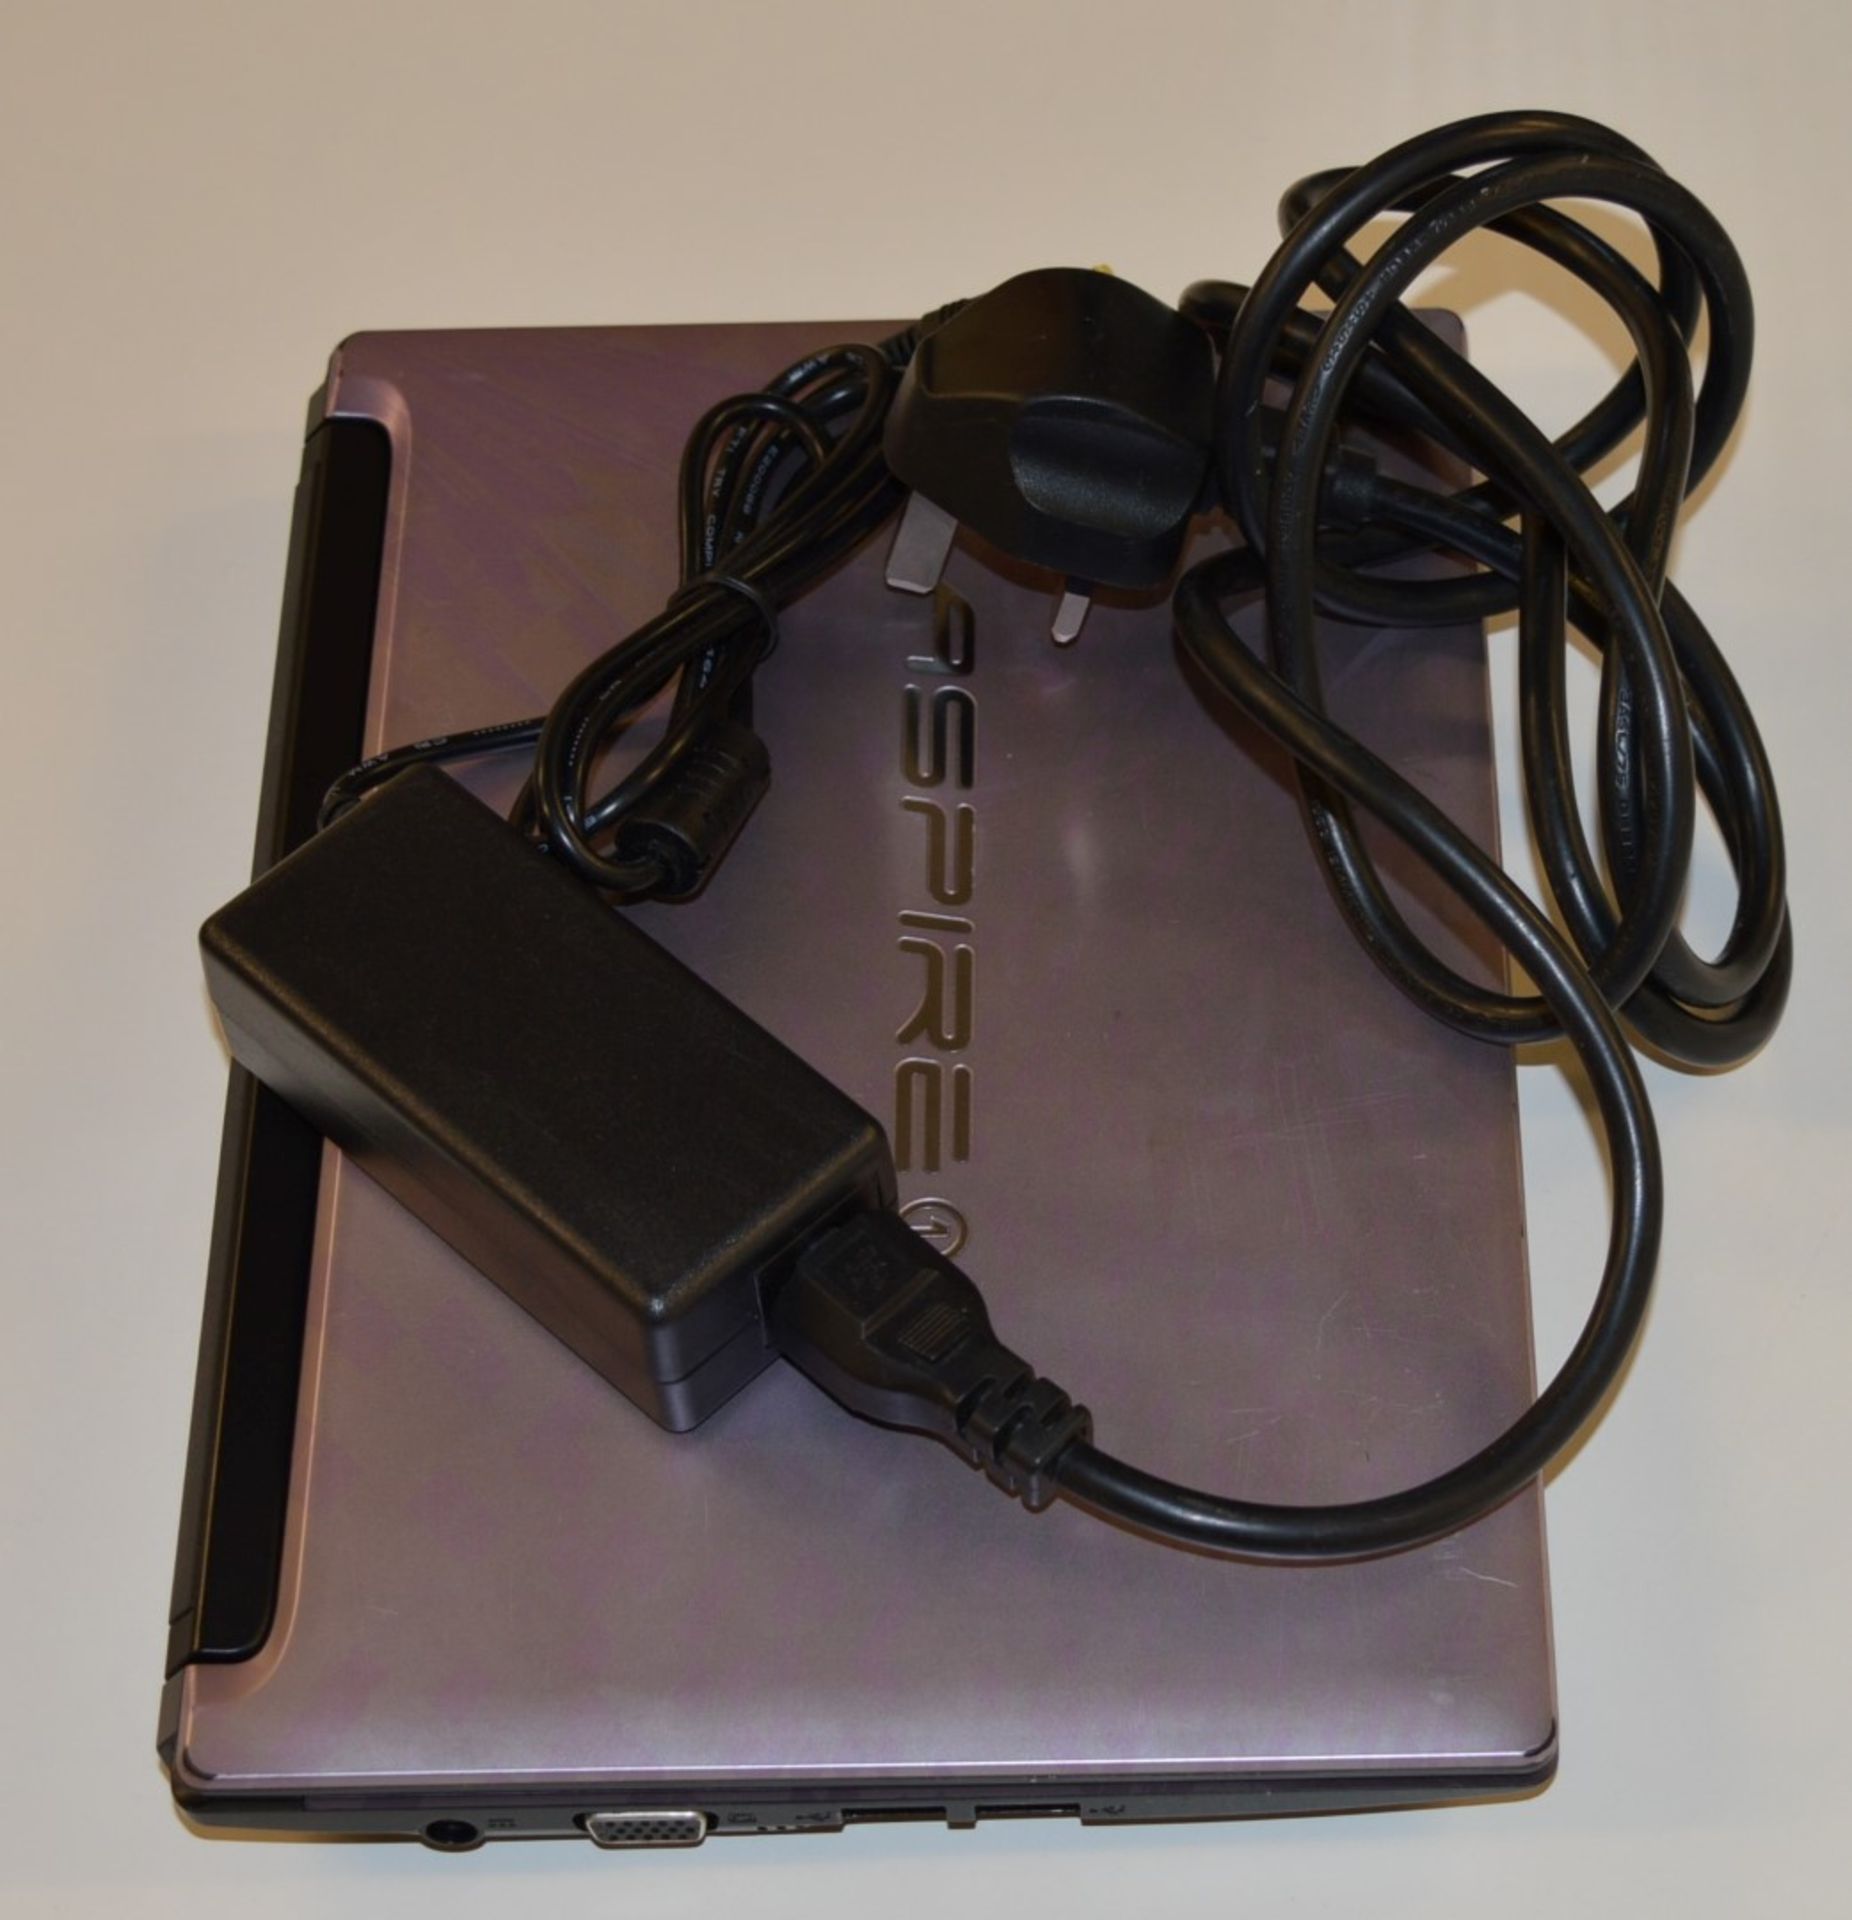 1 x Acer Aspire One Netbook Computer - Features 10 Inch Screen, 250gb Hard Drive, 1gb Ram, Intel 1. - Image 13 of 13